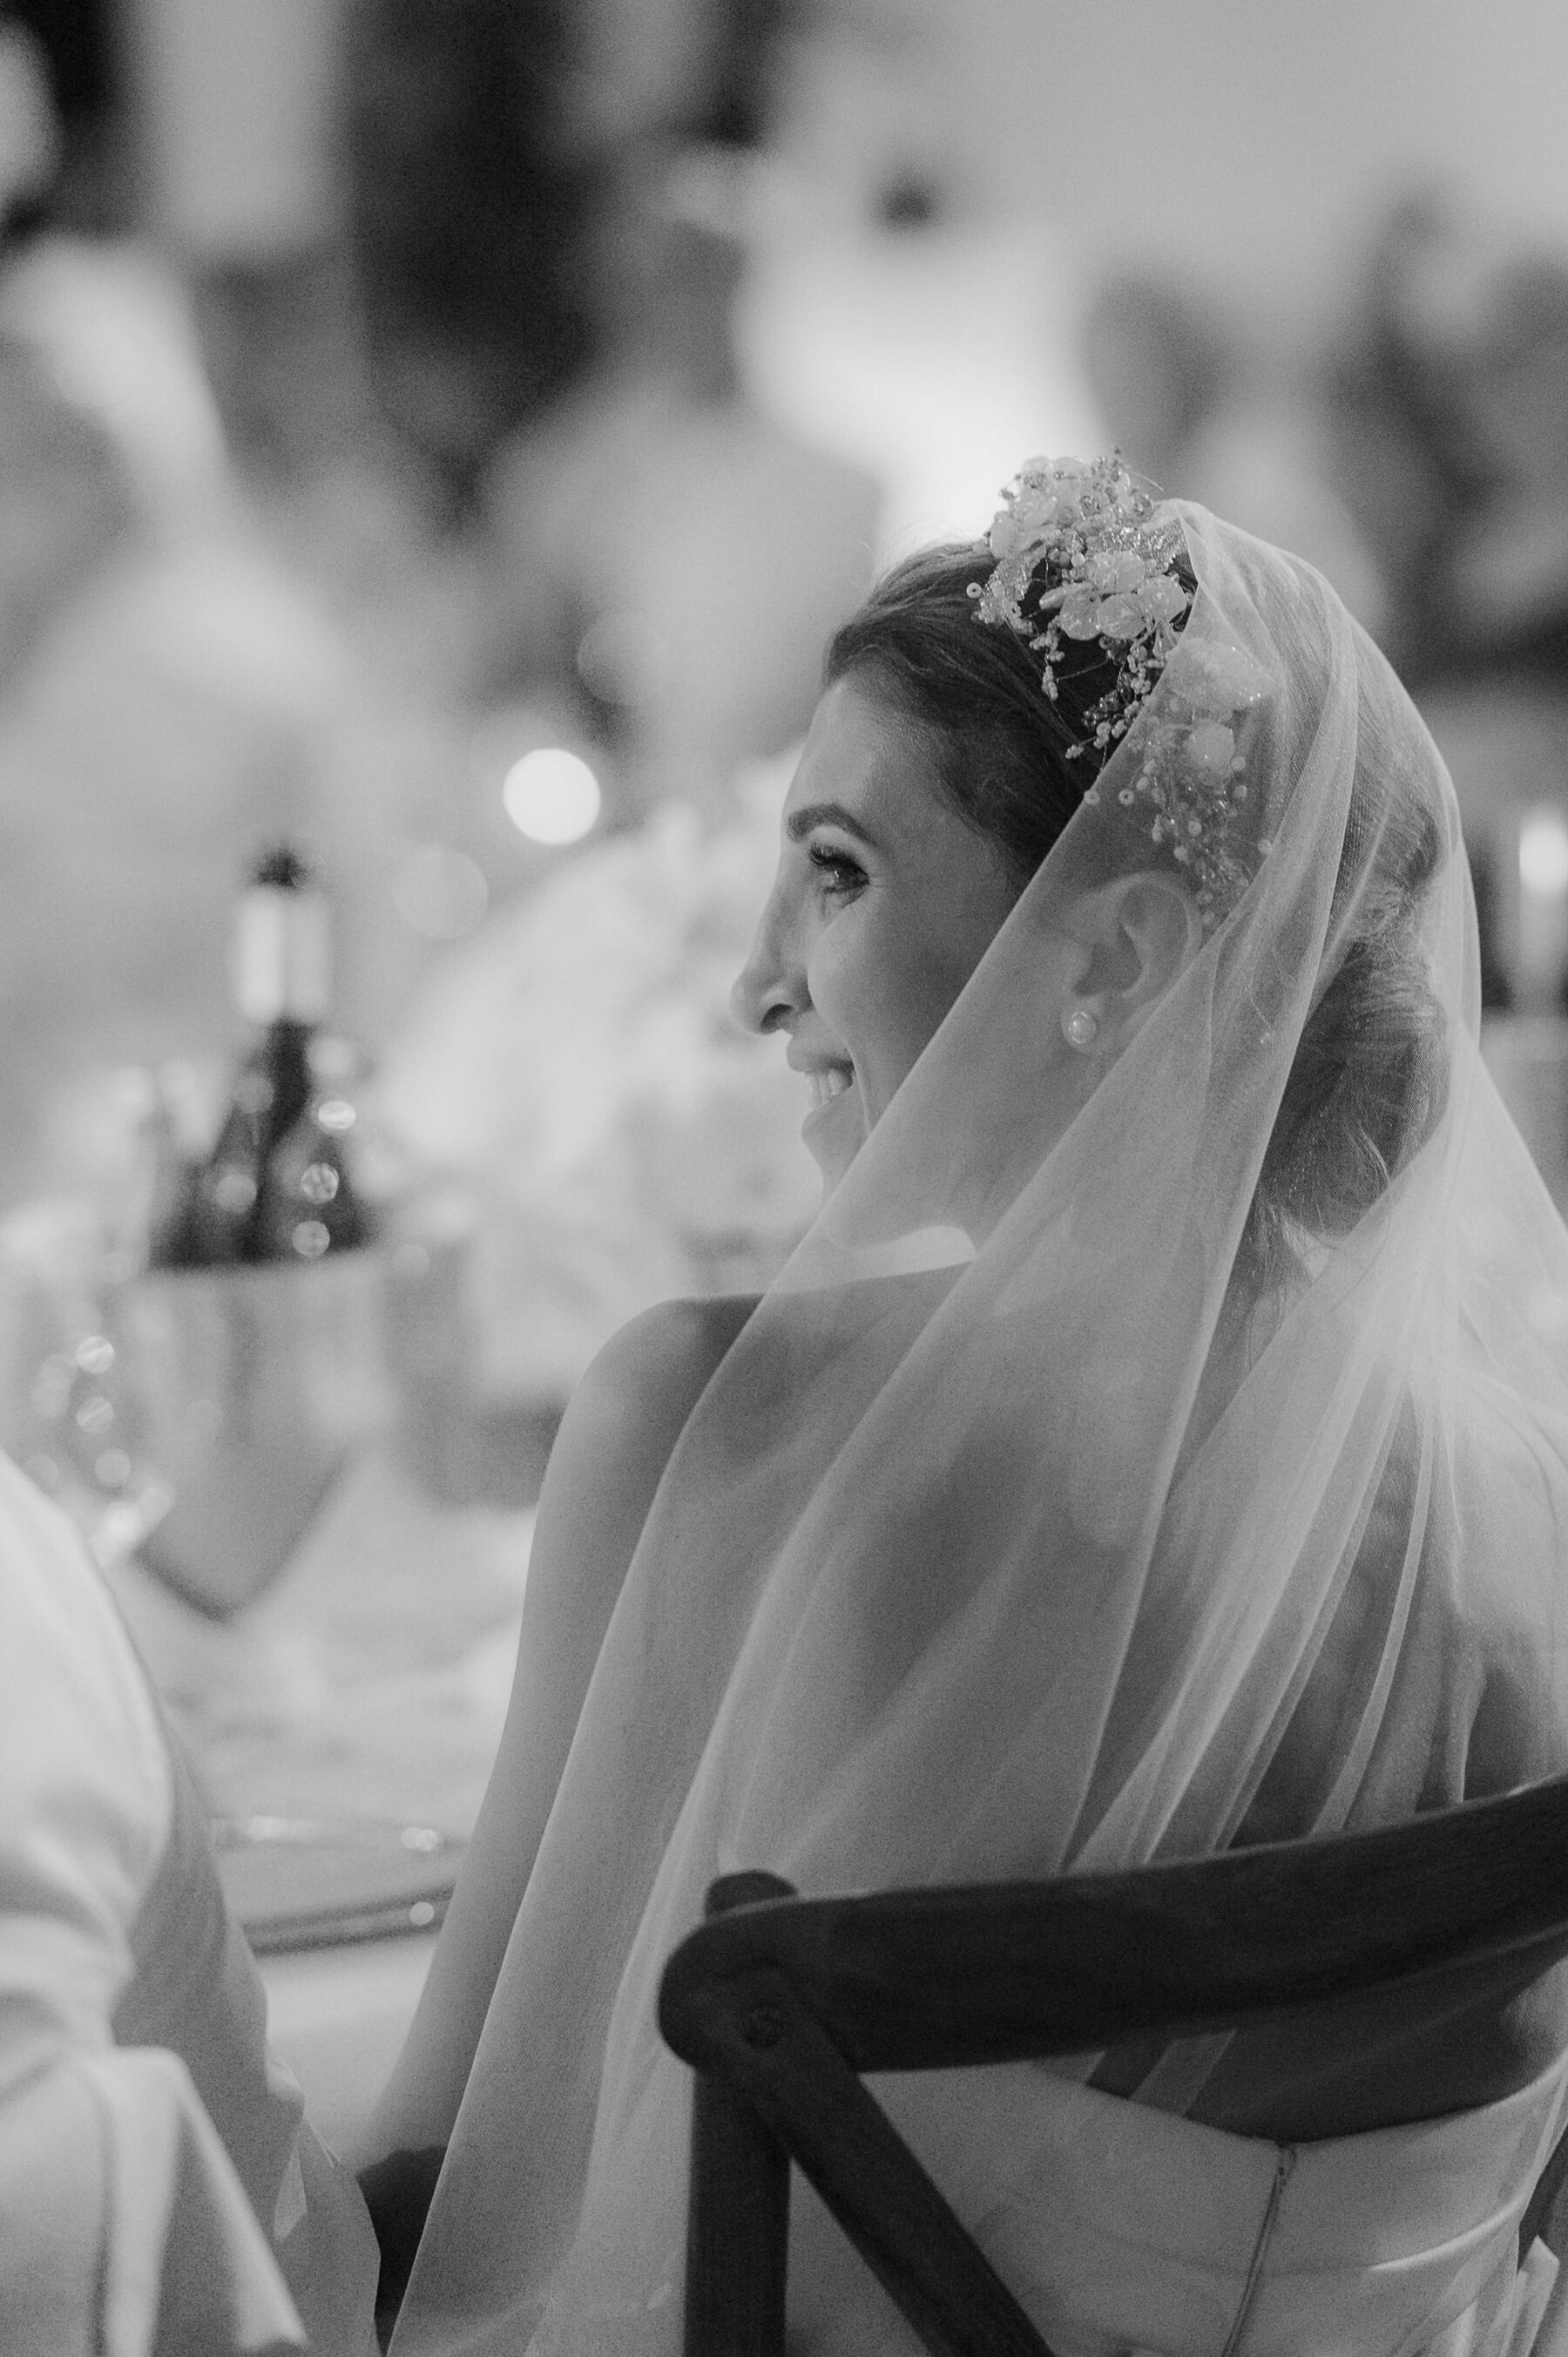 Black and white profile shot of bride in a tulle veil and mother of pearl headpiece seated at the wedding reception.